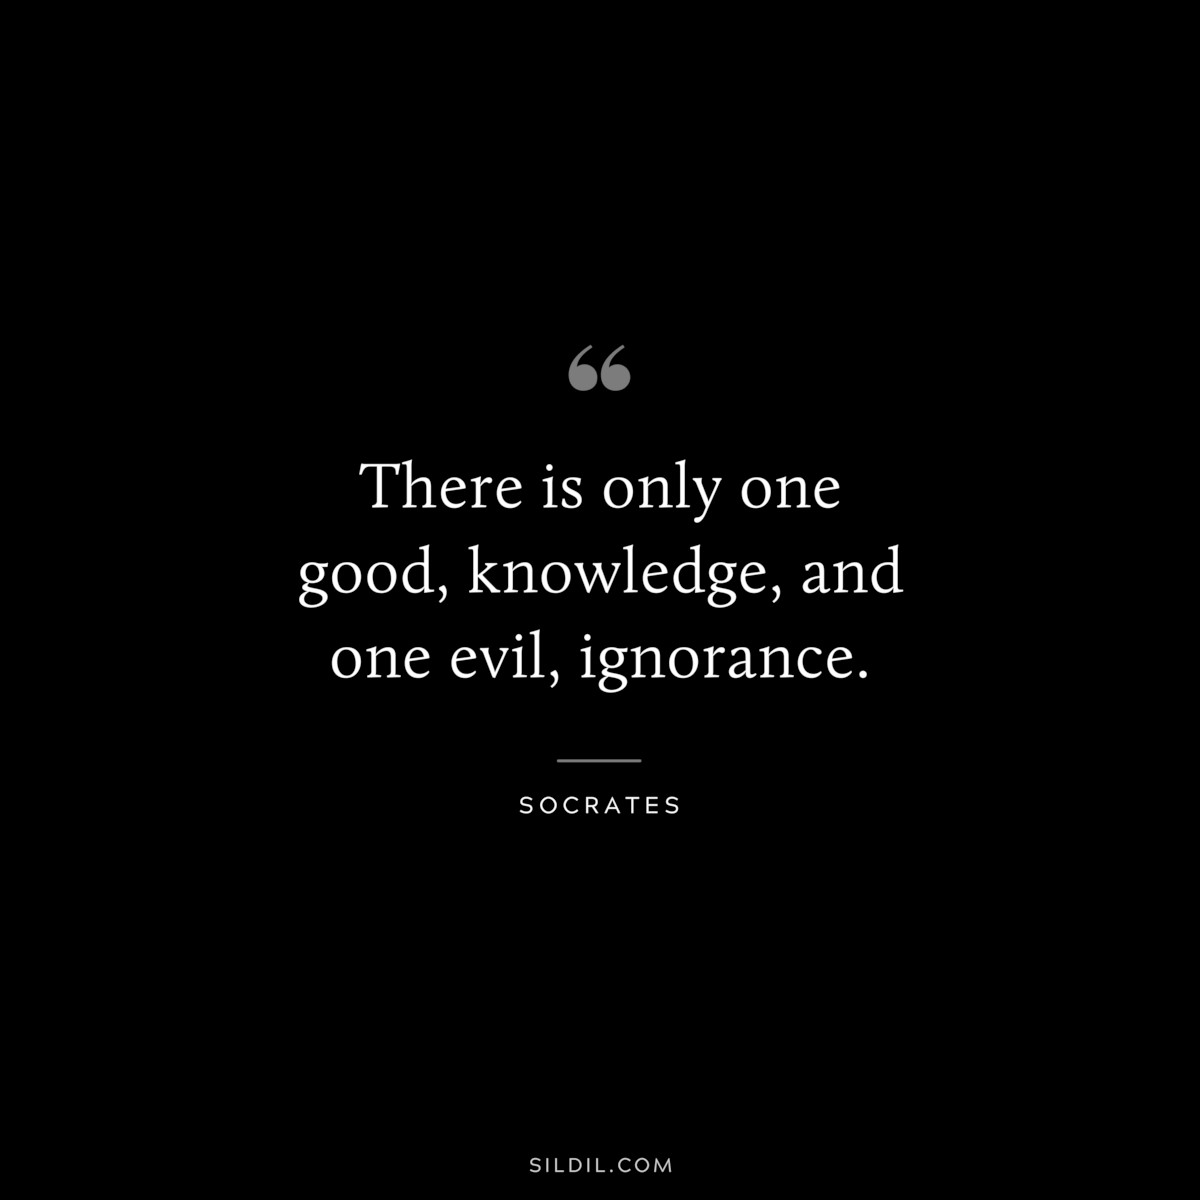 There is only one good, knowledge, and one evil, ignorance. ― Socrates